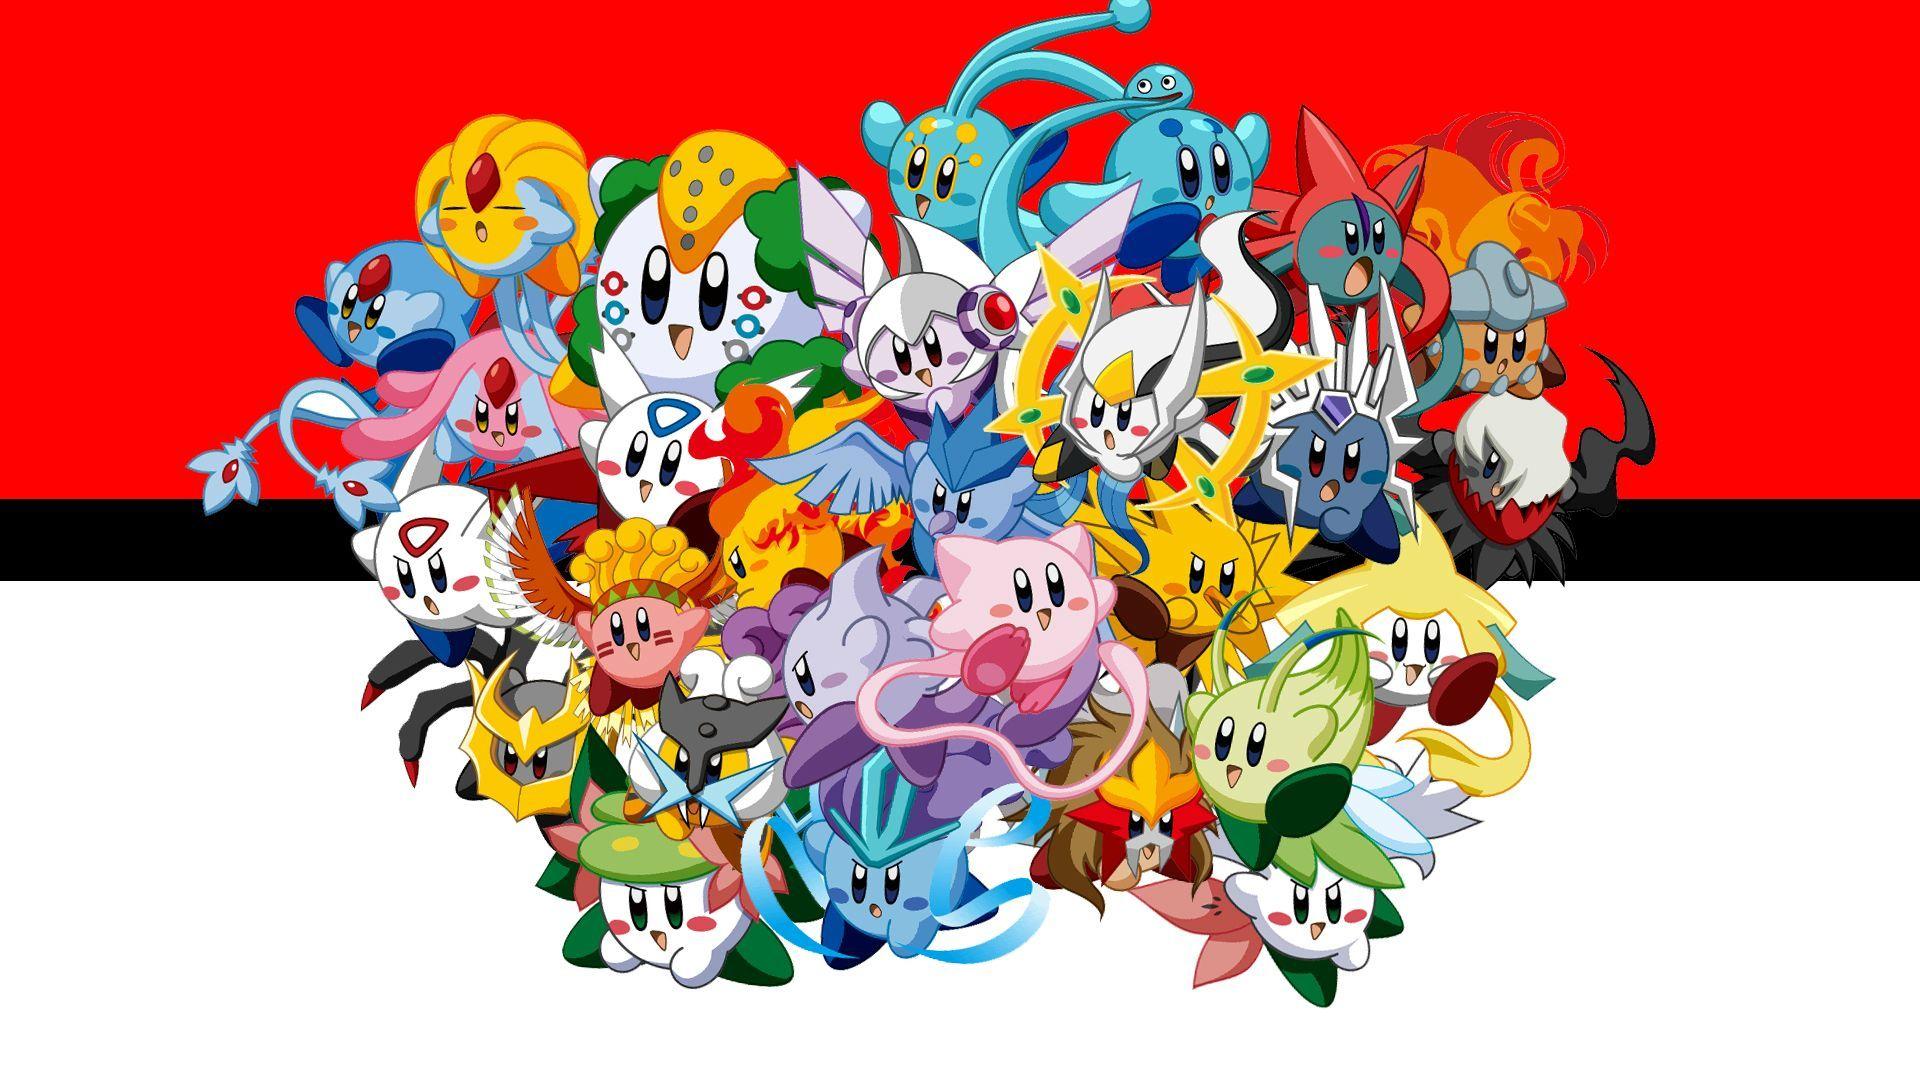 I made a wallpaper with Kirby as (most of) the Legendary Pokémon